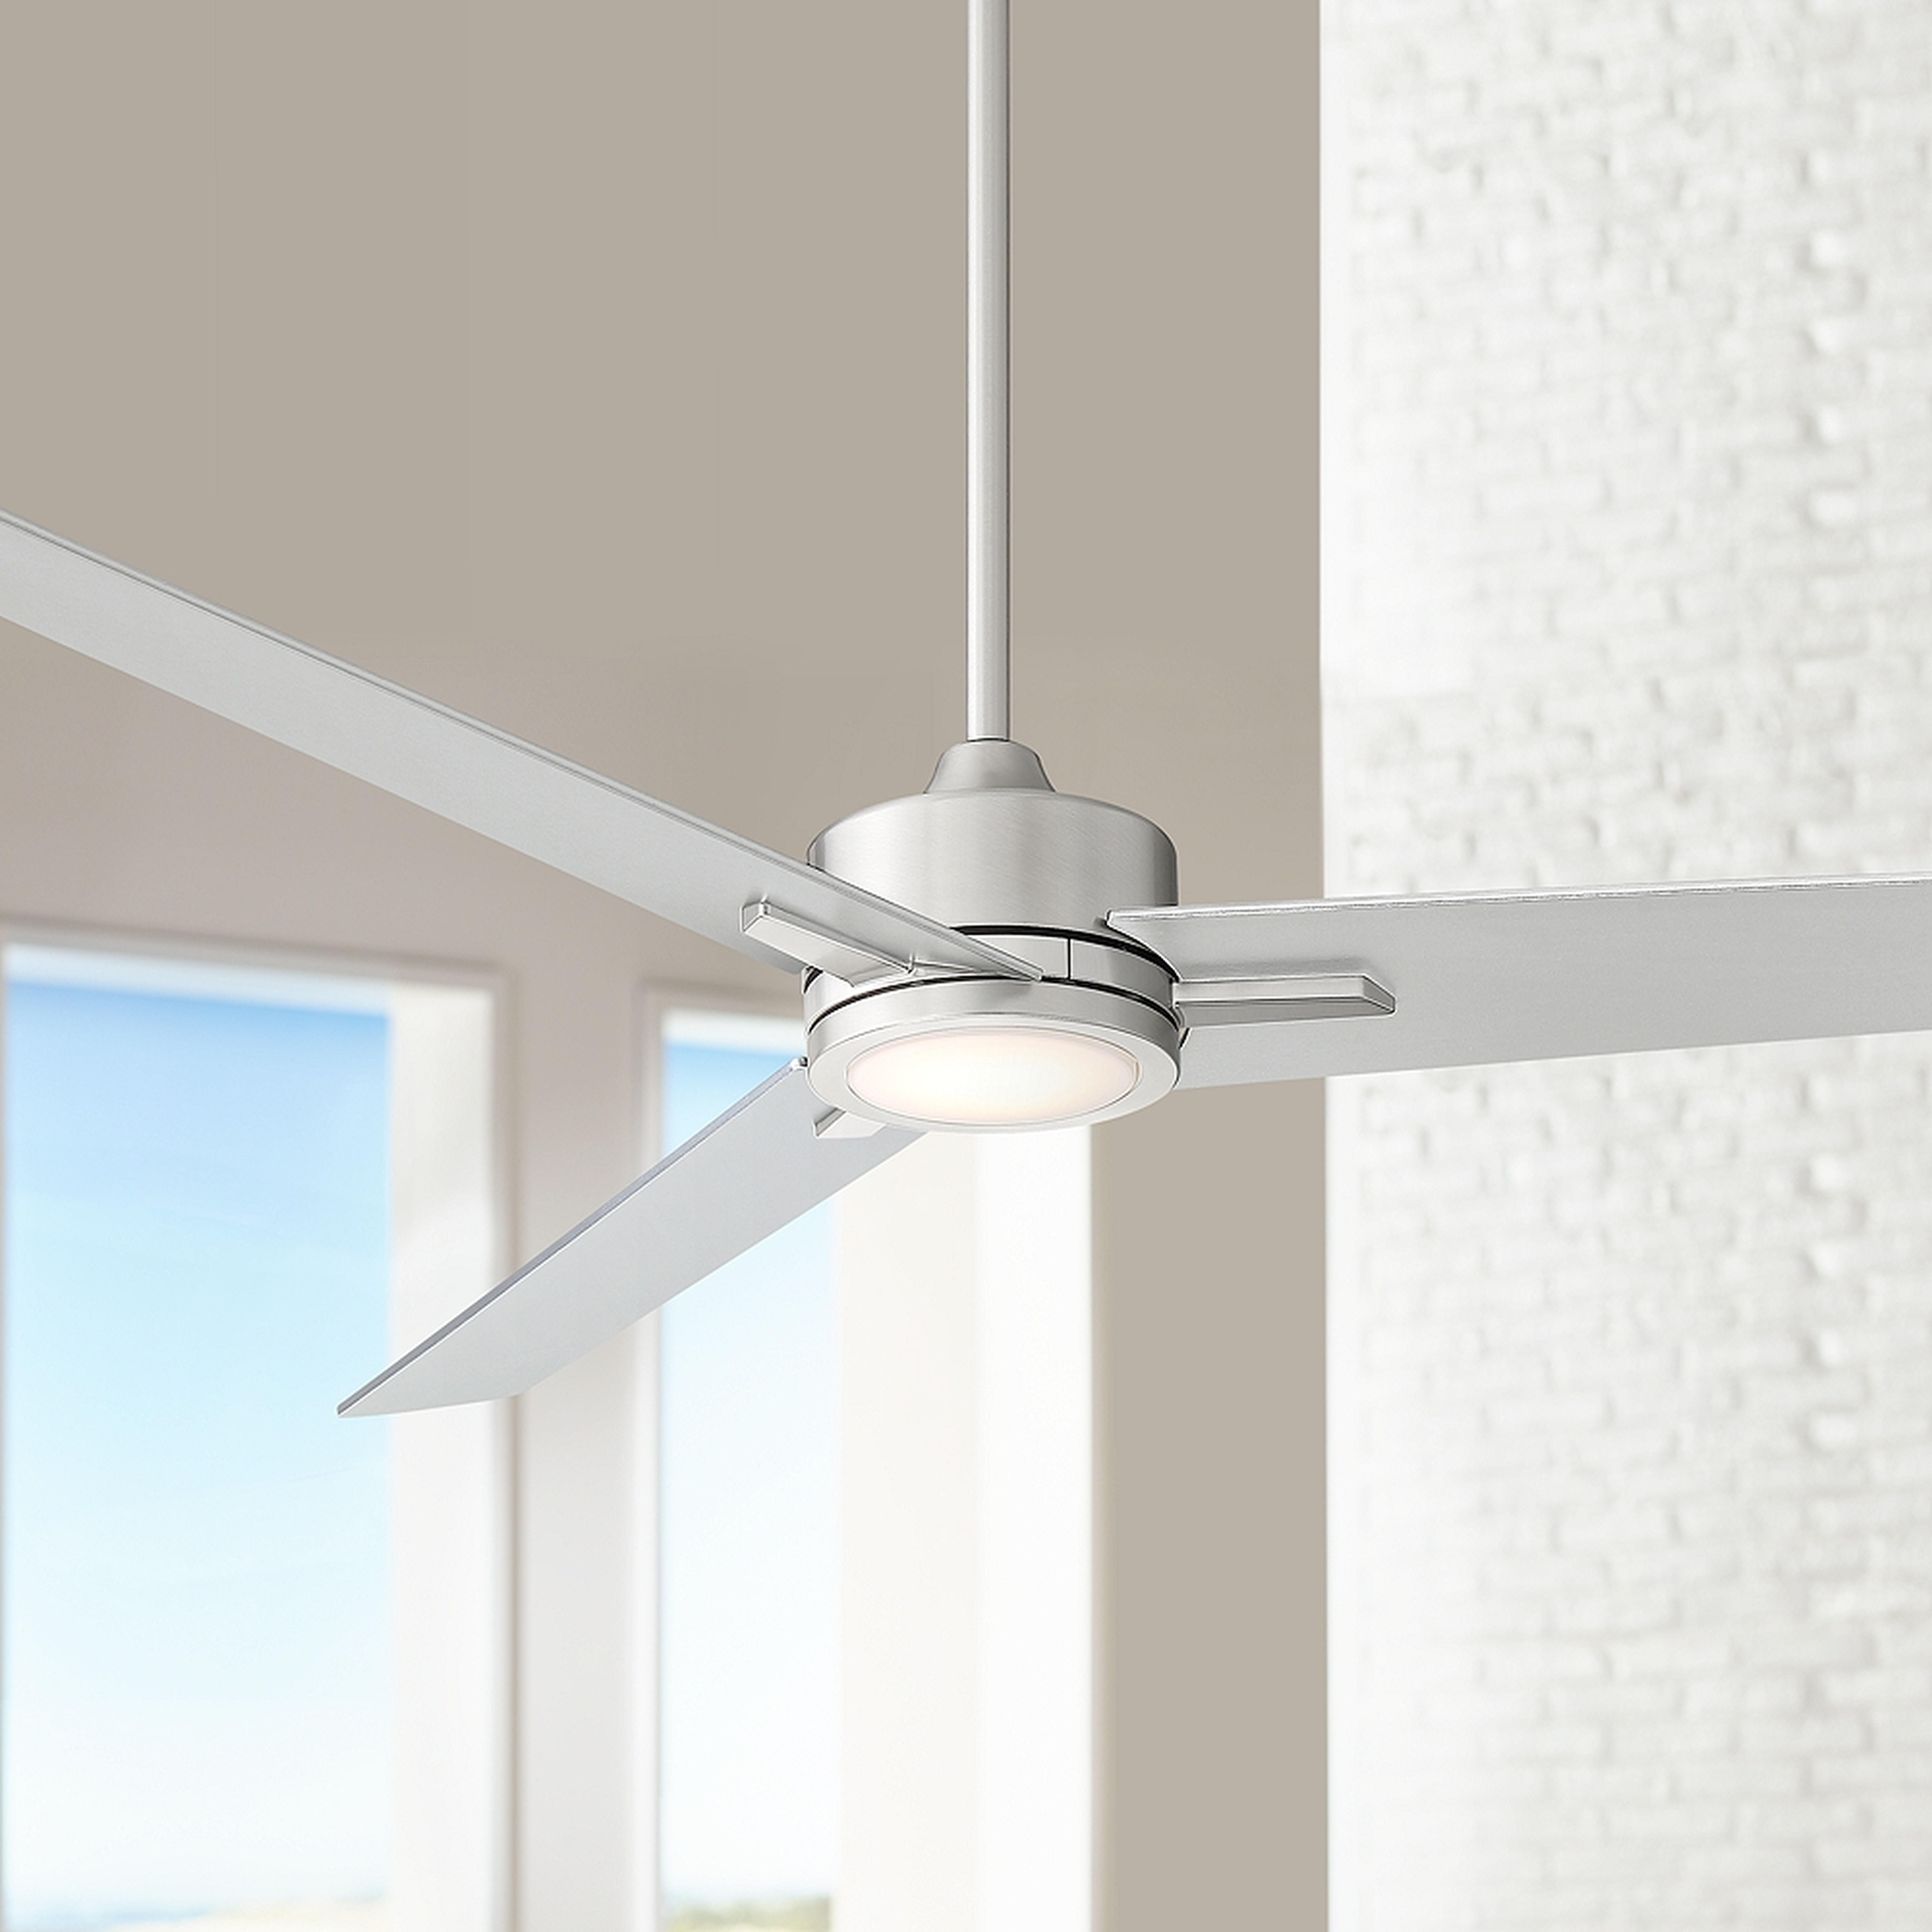 60" Monte Largo Brushed Nickel LED Ceiling Fan - Style # 64M90 - Lamps Plus